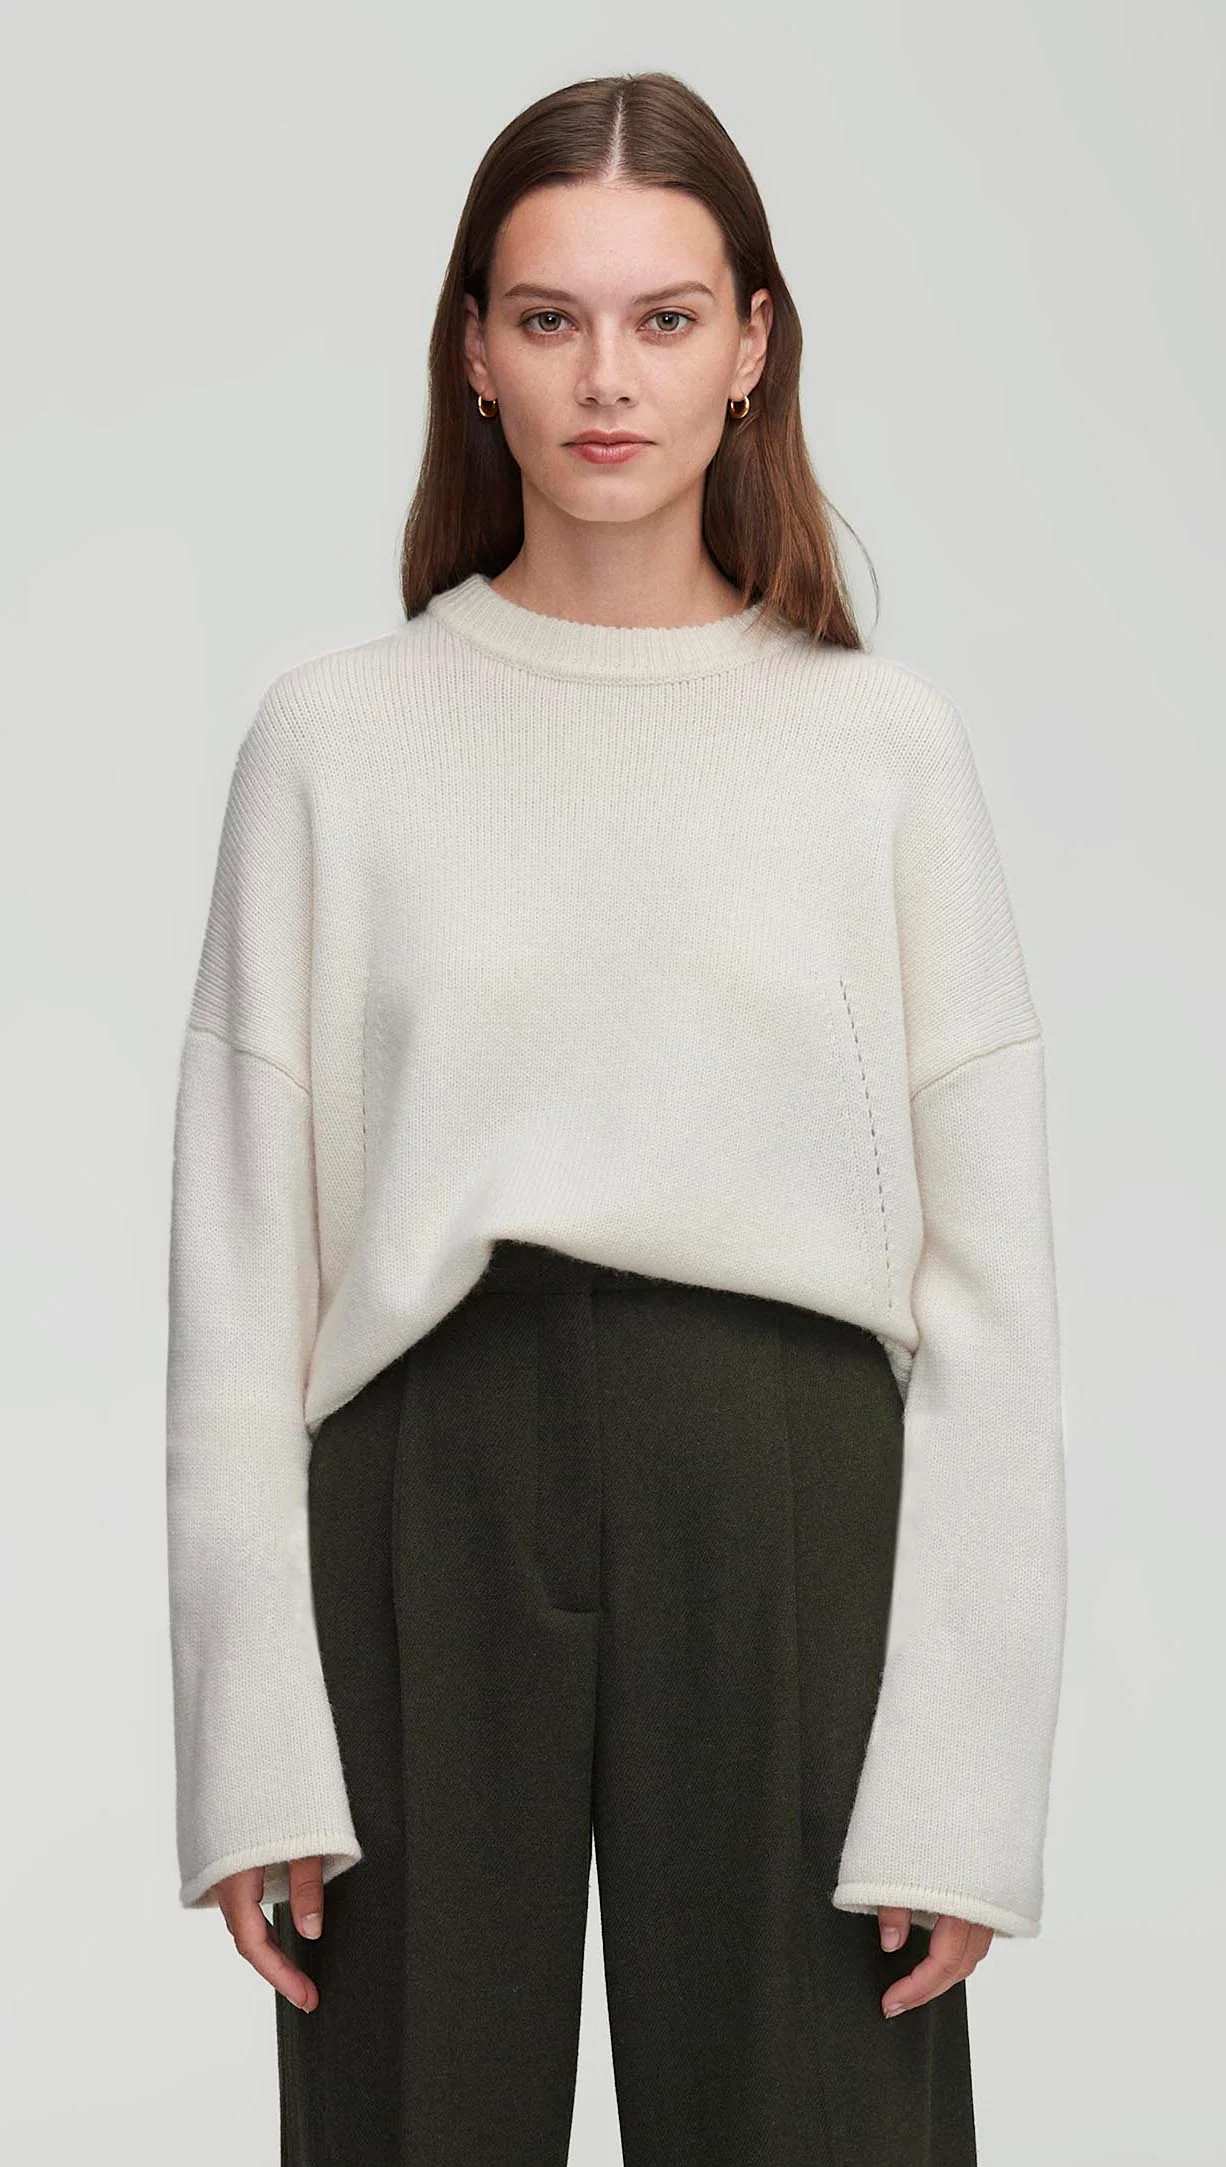 Argent: Everyday Boxy Crew in Wool-Cashmere | Women's Sweaters | Argent | Argent